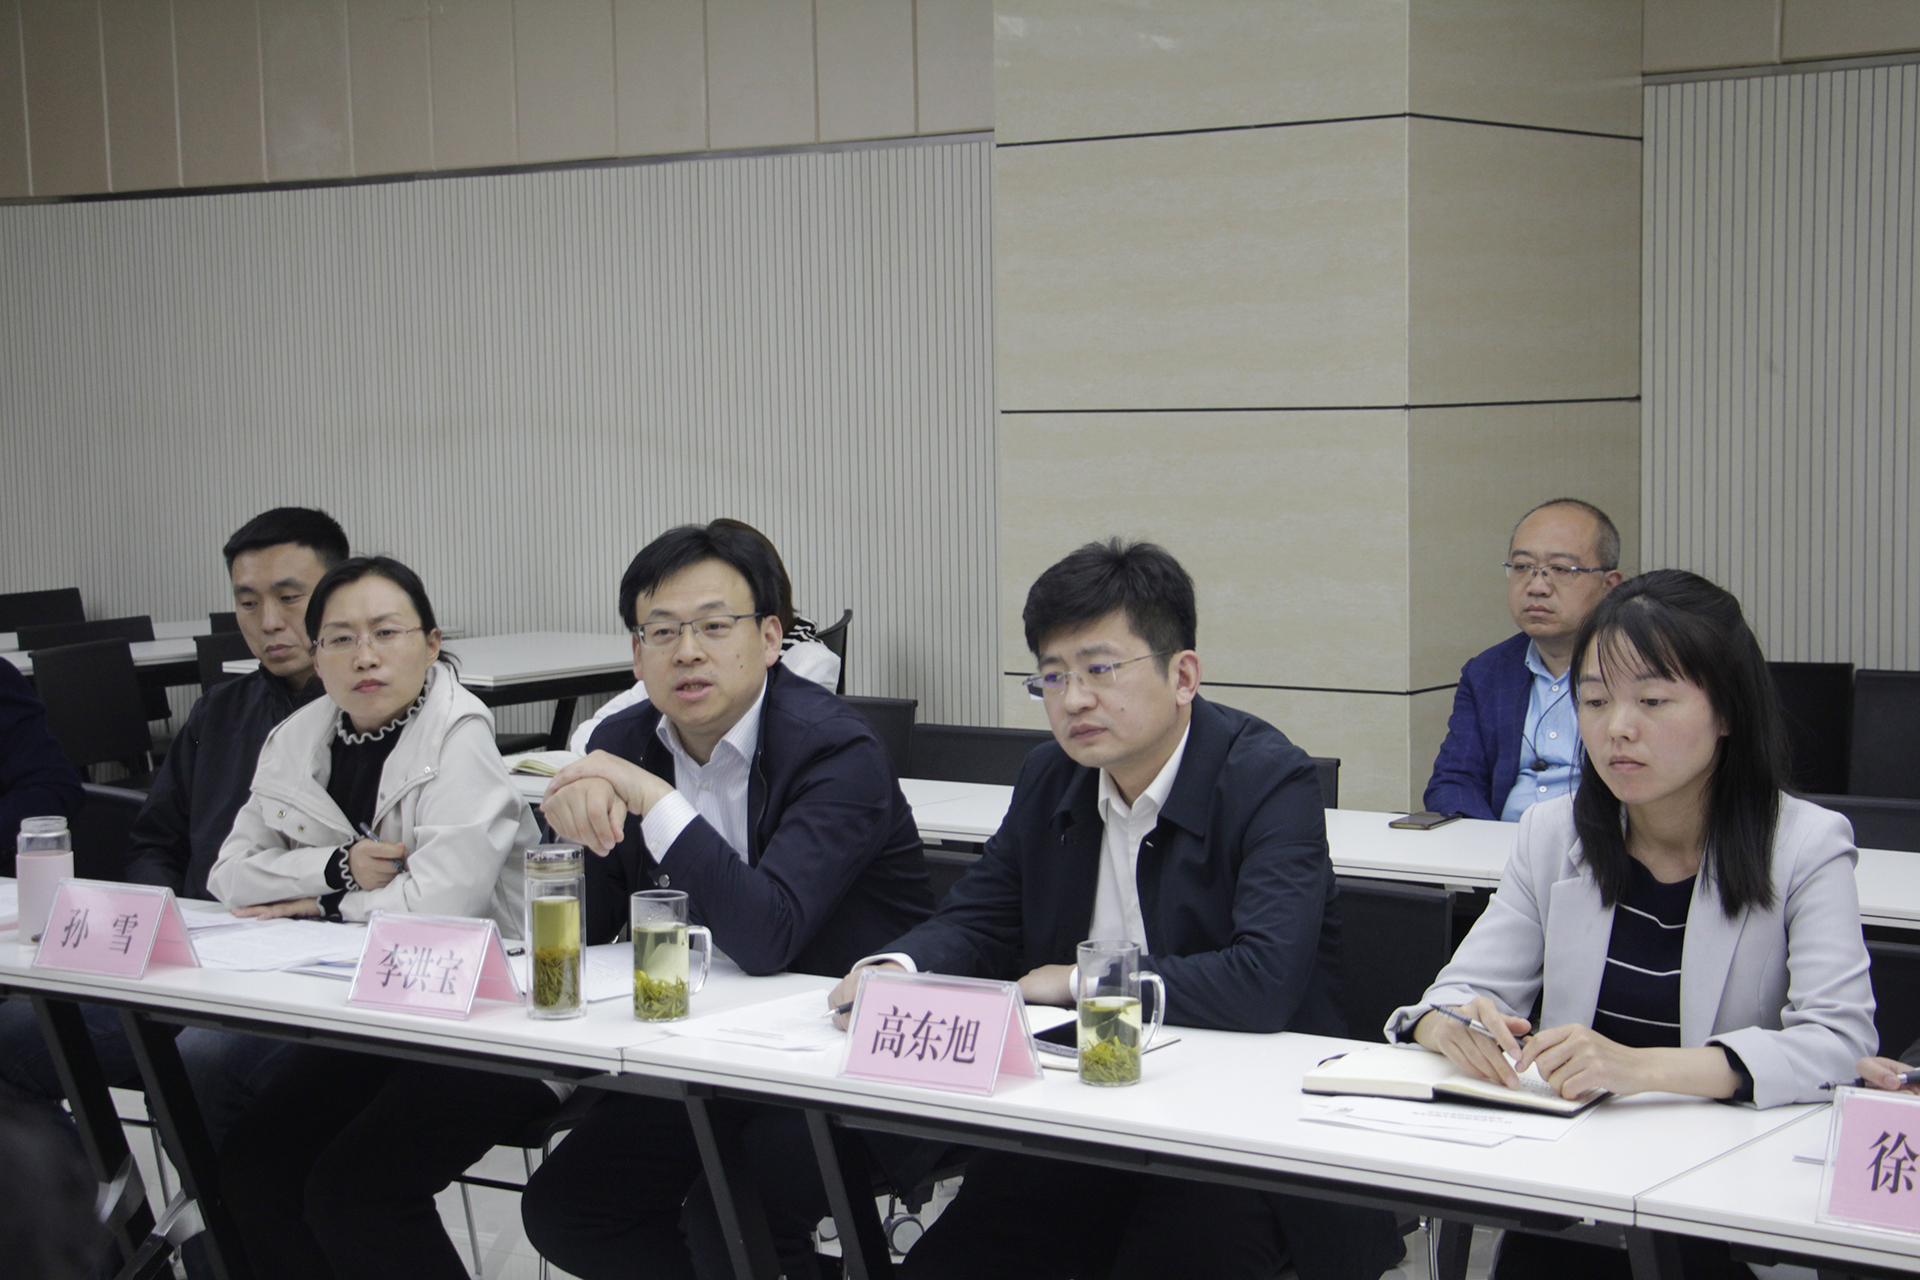 China Coal Group Participate In Jining Youth E-Commerce Alliance Activities